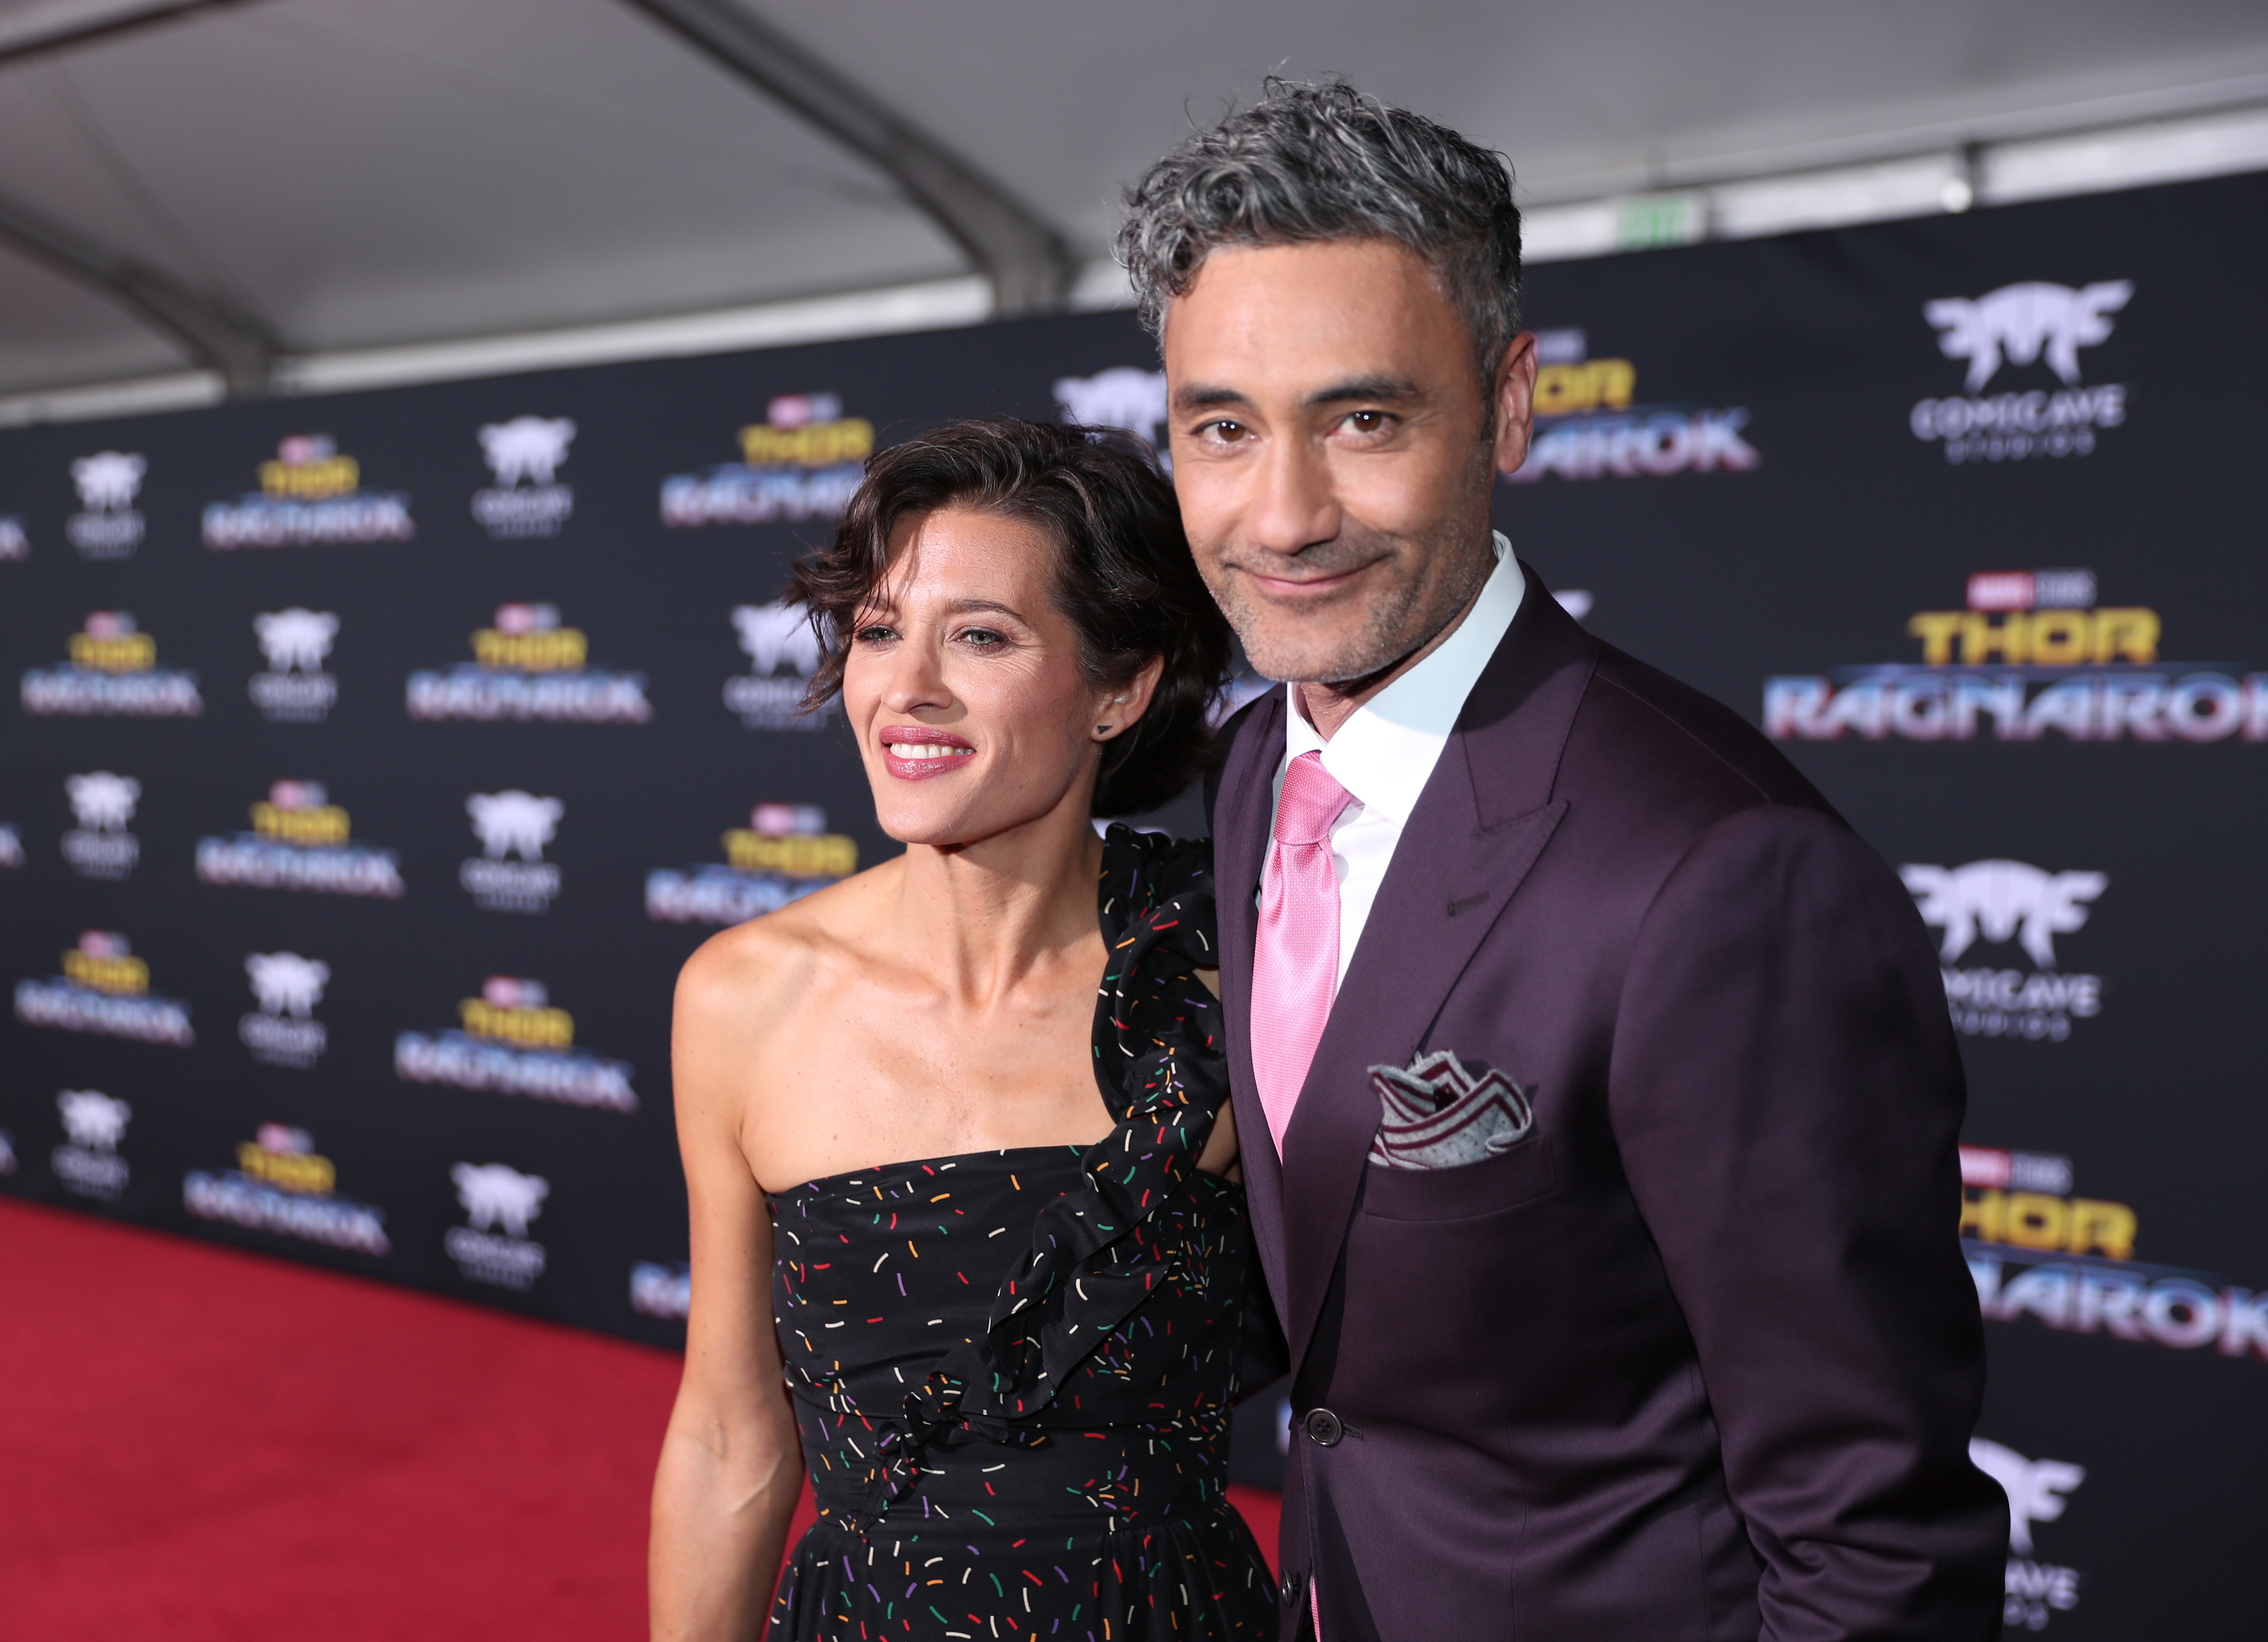 Chelsea and Taika posing on the red carpet, she in a patterned dress and he in a suit with a pink tie